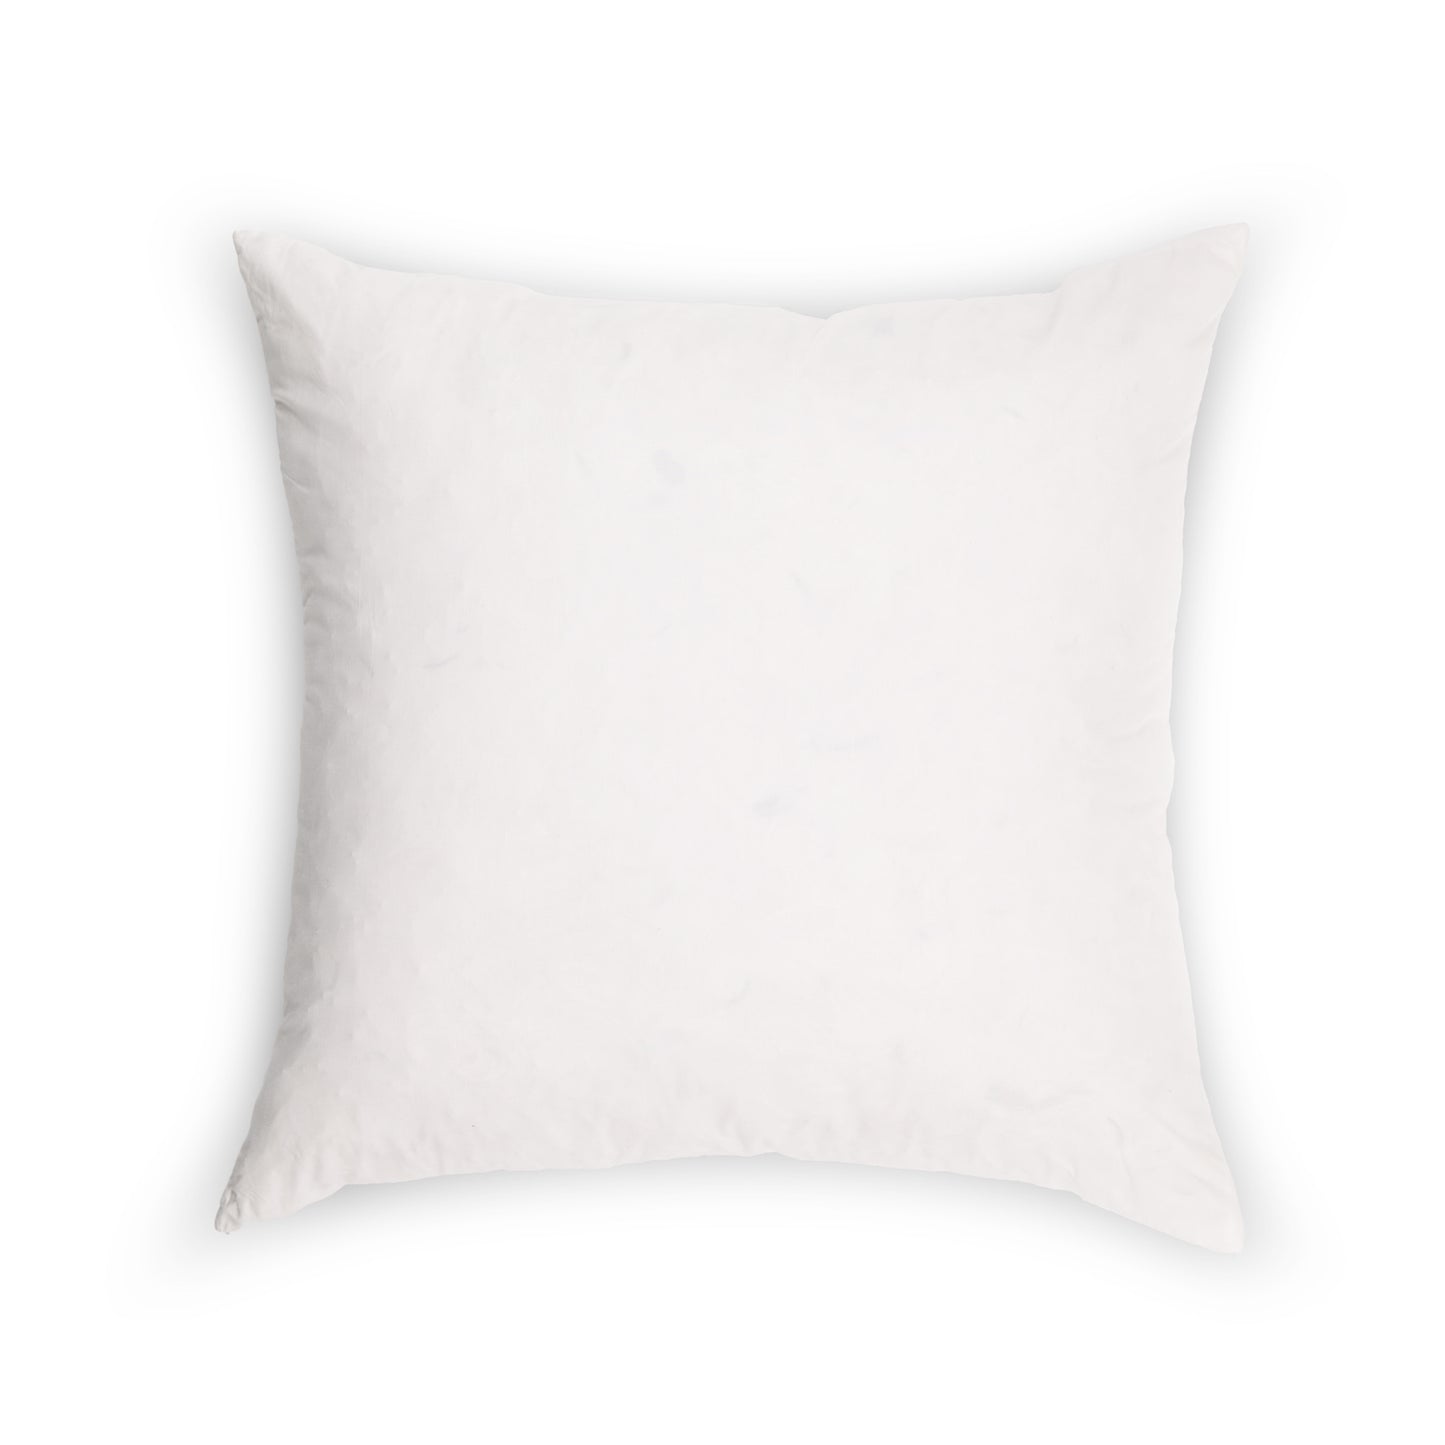 18x18 Goose Down Throw Pillow Inserts (Set of 2)